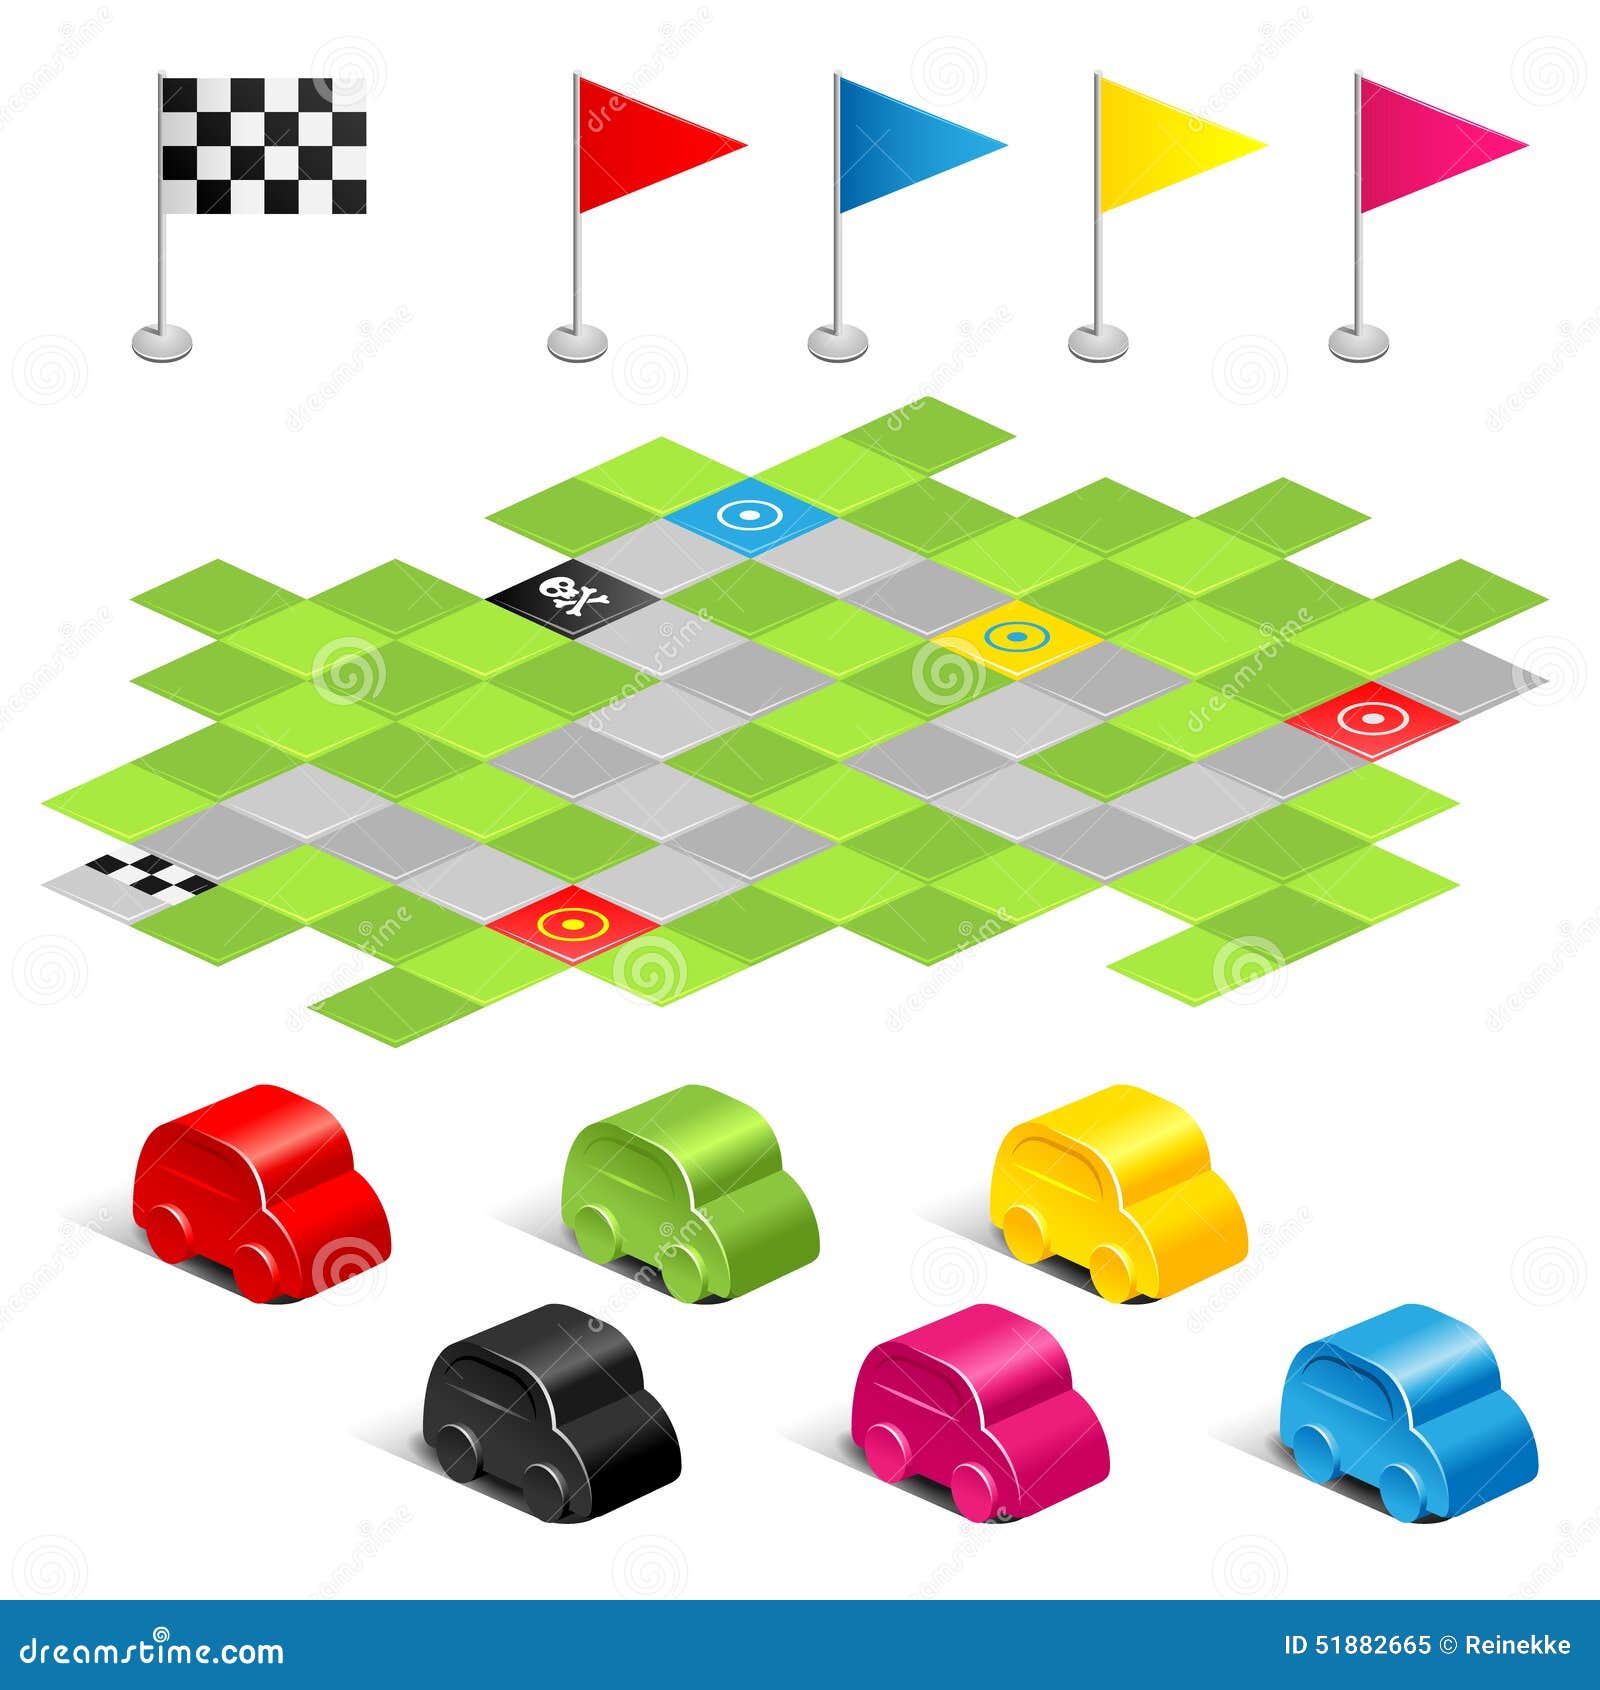 Racing game Vectors & Illustrations for Free Download